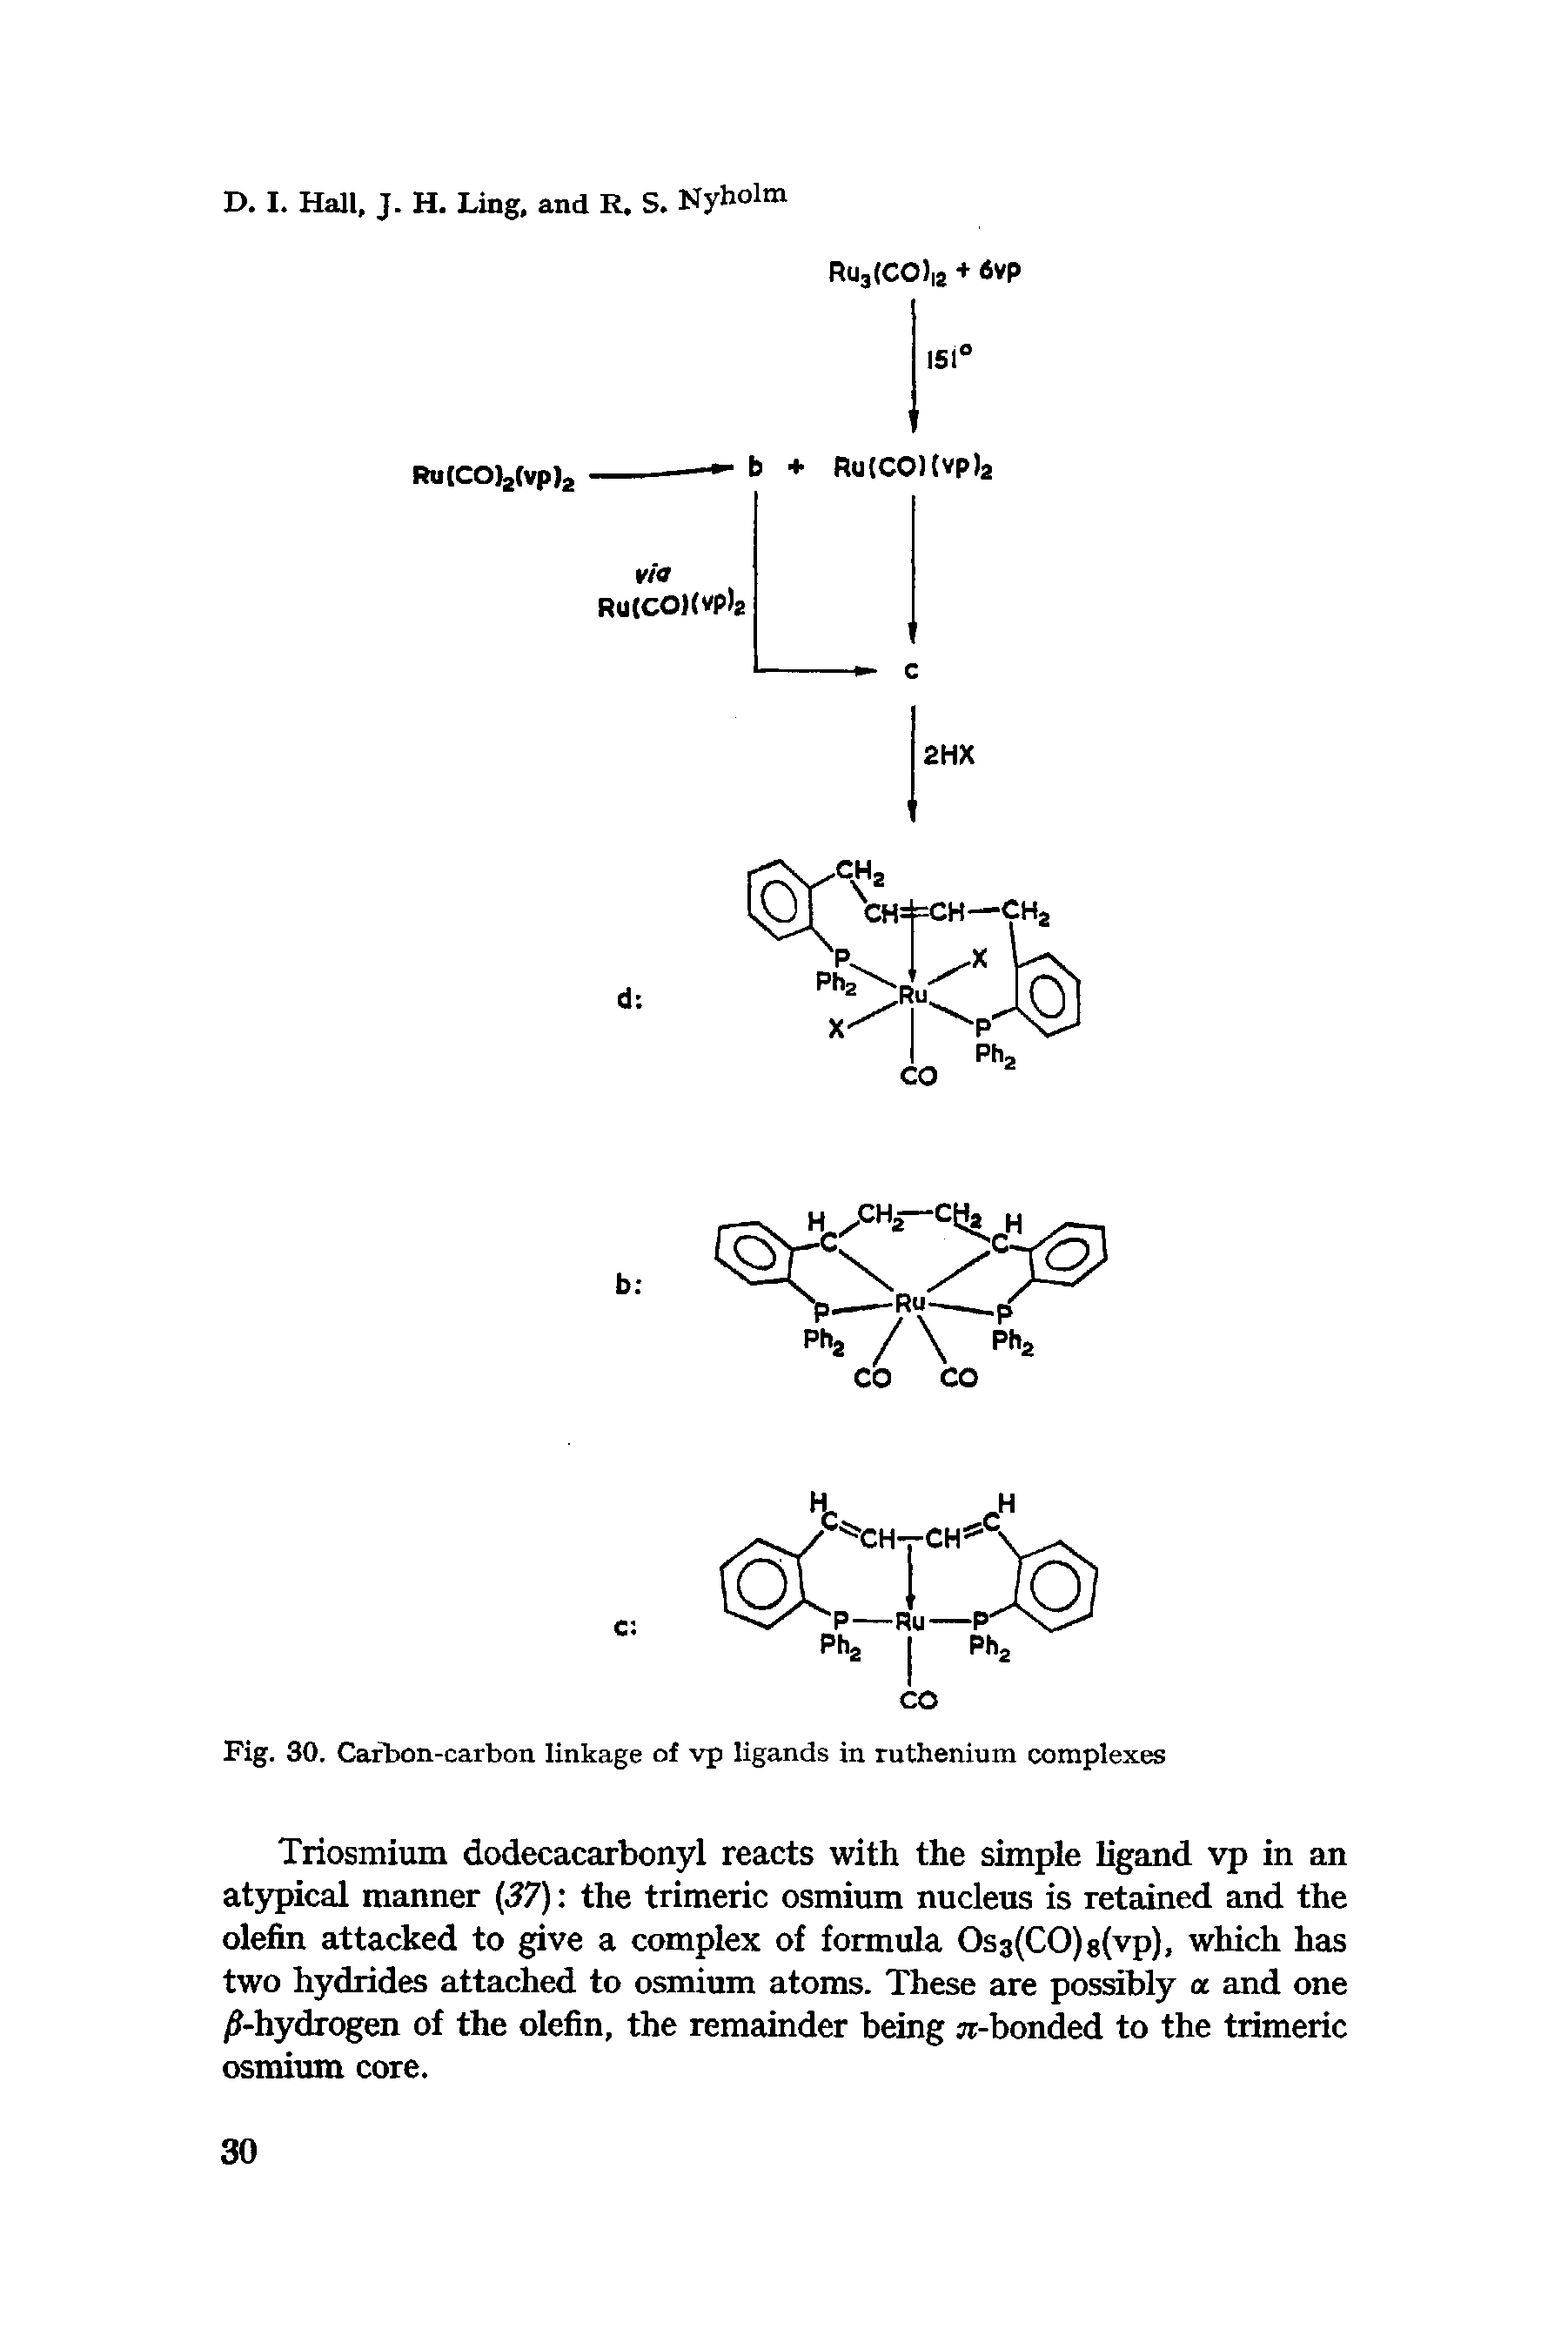 Fig. 30. Carbon-carbon linkage of vp ligands in ruthenium complexes...